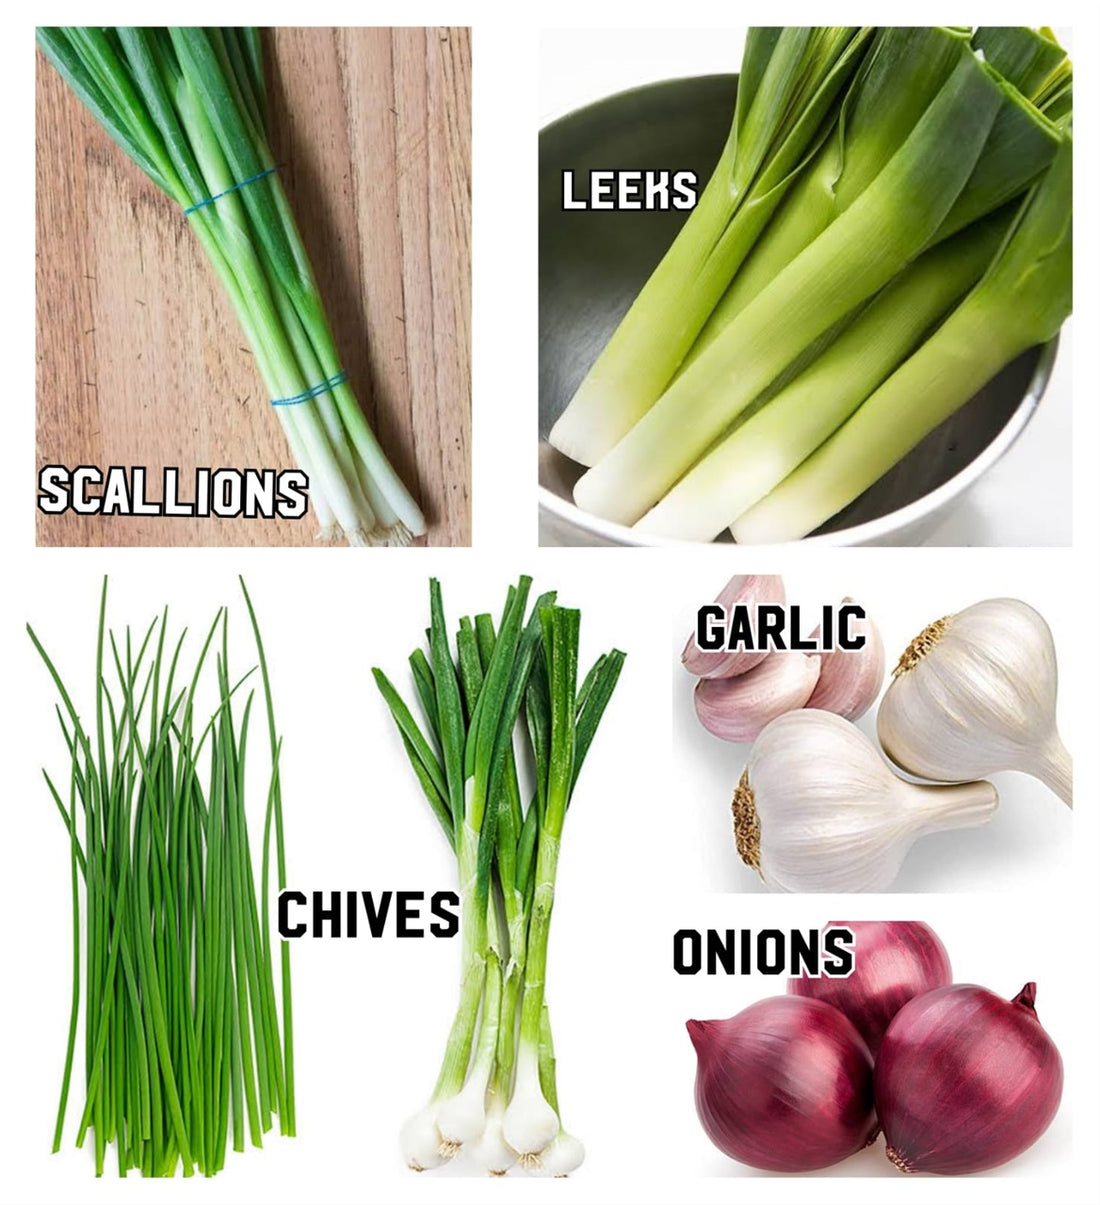 HOW TO NATURALLY KEEP YOUR PROSTATE HEALTHY WITH ALLIUM VEGETABLES | 12. Mar, 2022